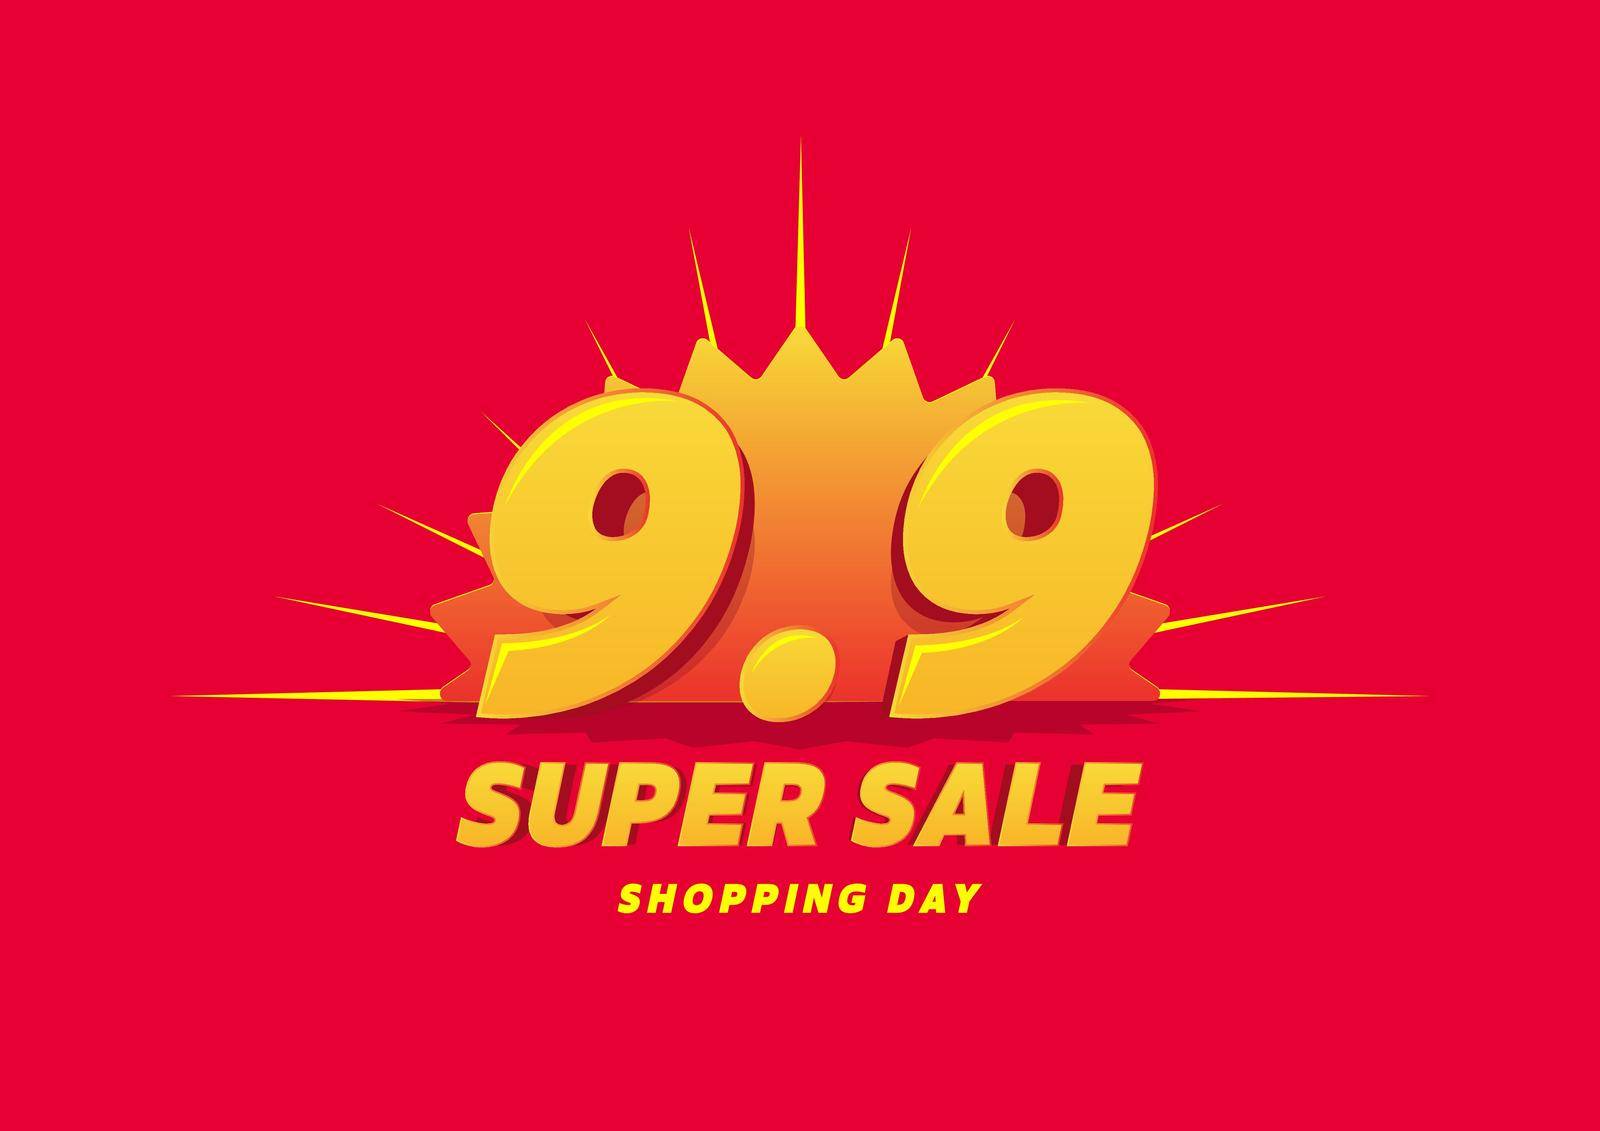 9.9 Shopping day sale poster or flyer design. 9.9 Super sale online banner. by windawake